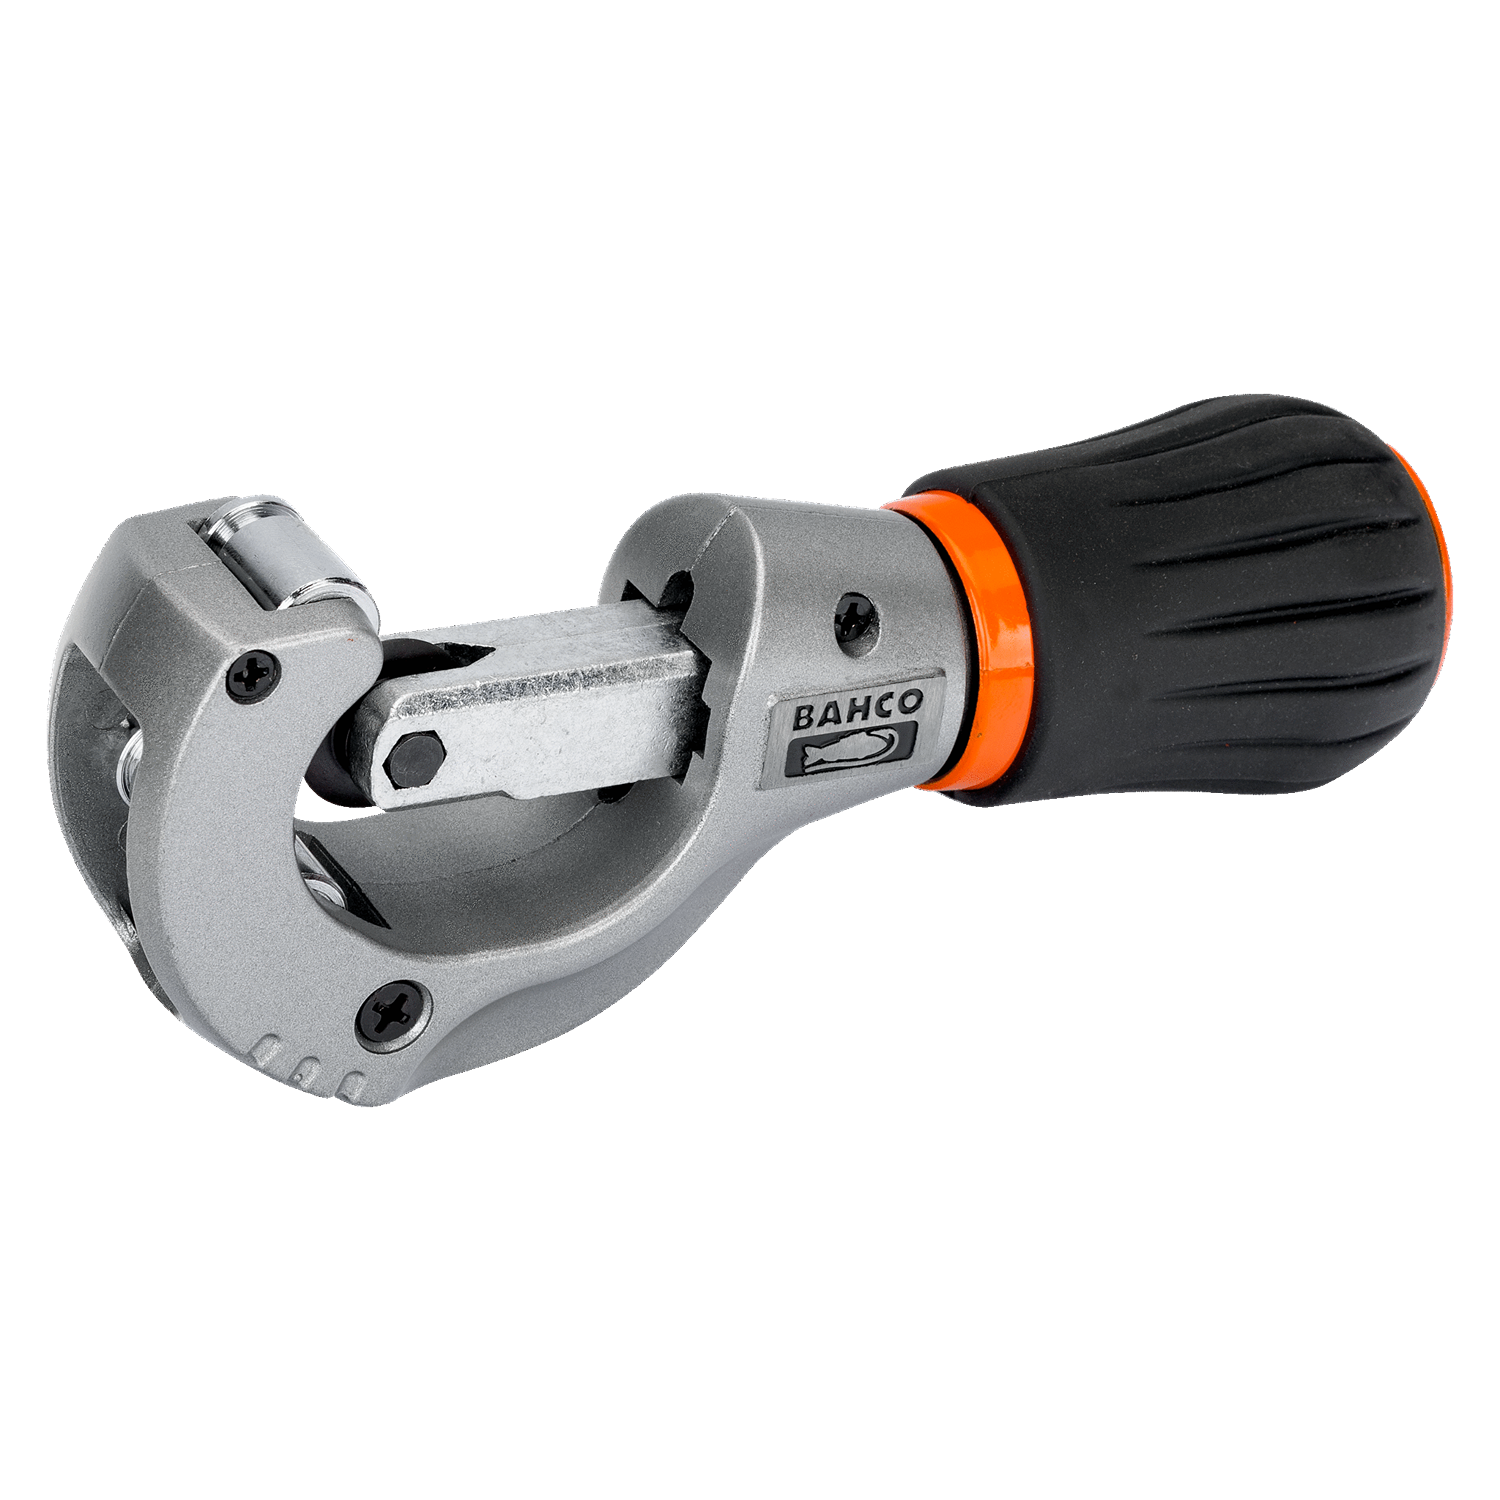 BAHCO 402-35 Tube/Pipe Cutter 3 mm-35 mm (BAHCO Tools) - Premium Pipe Cutter from BAHCO - Shop now at Yew Aik.